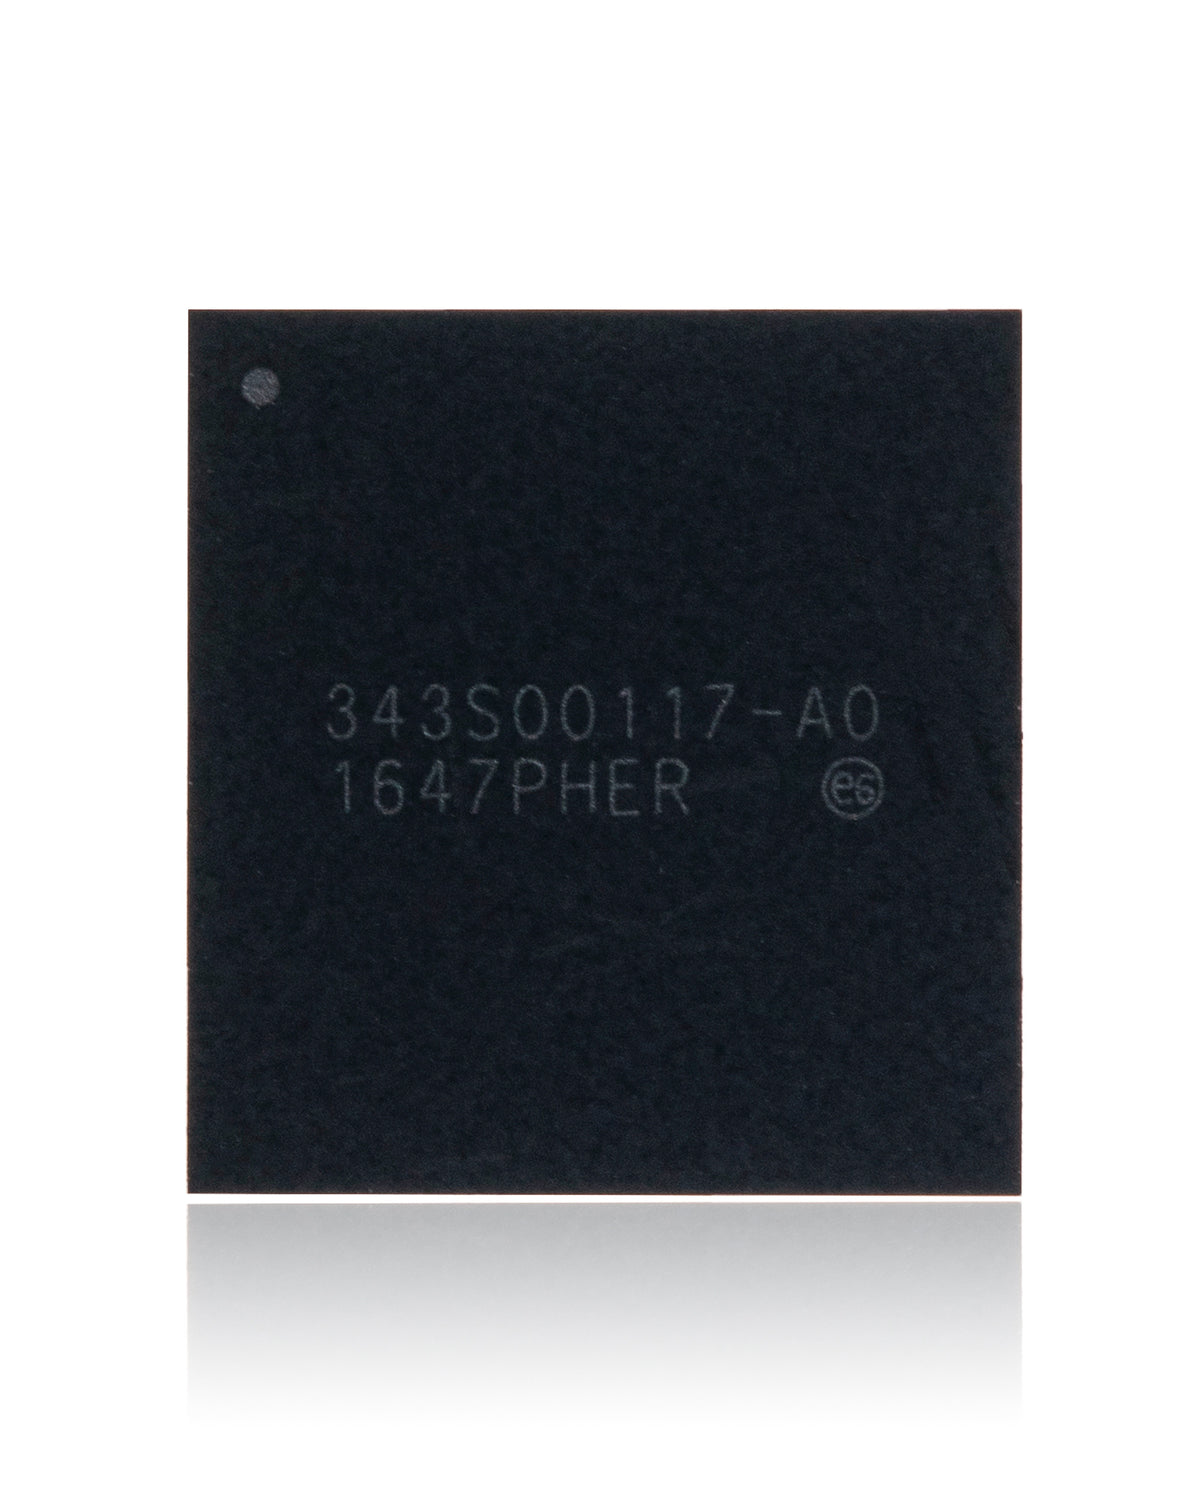 POWER MANAGEMENT IC FOR IPAD PRO 12.9" 2ND GEN (2017) (343S00117)